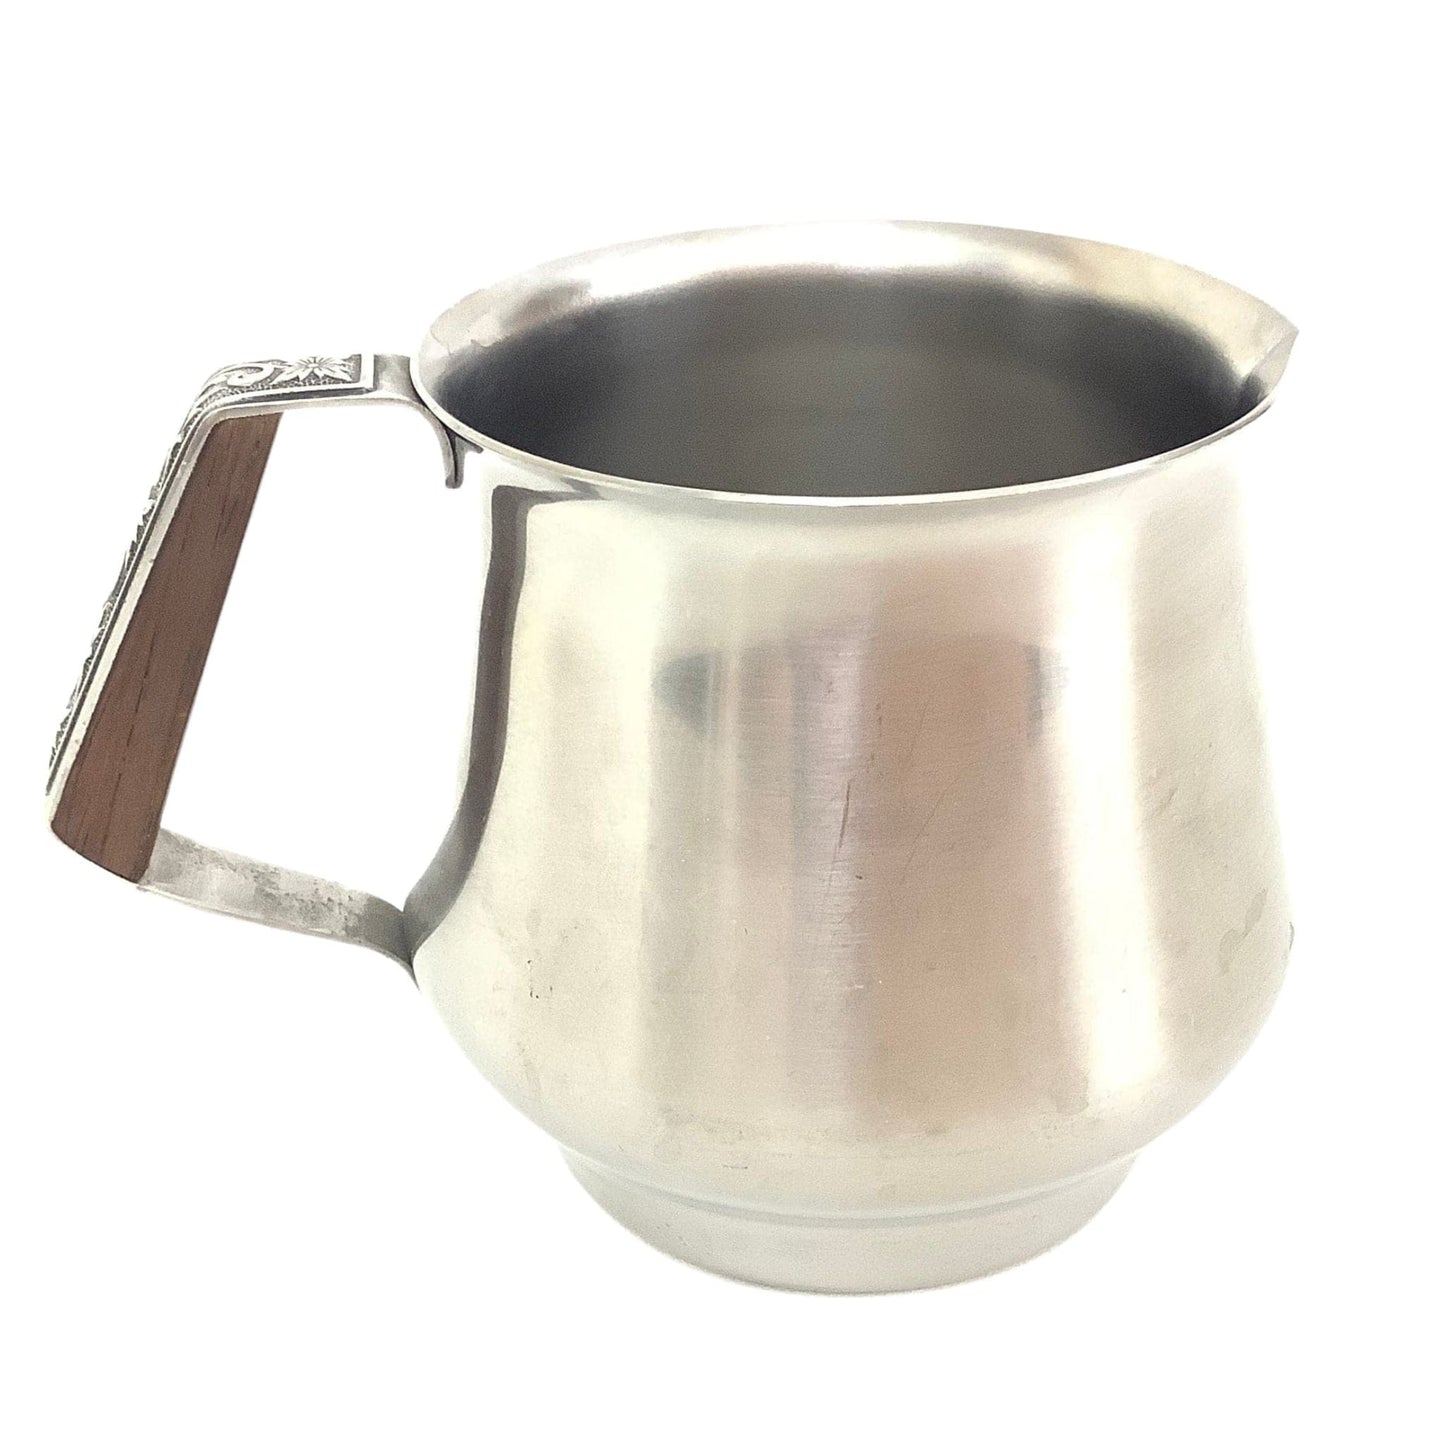 1950s Stainless Creamer Stainless / Stainless / Mid Century Modern